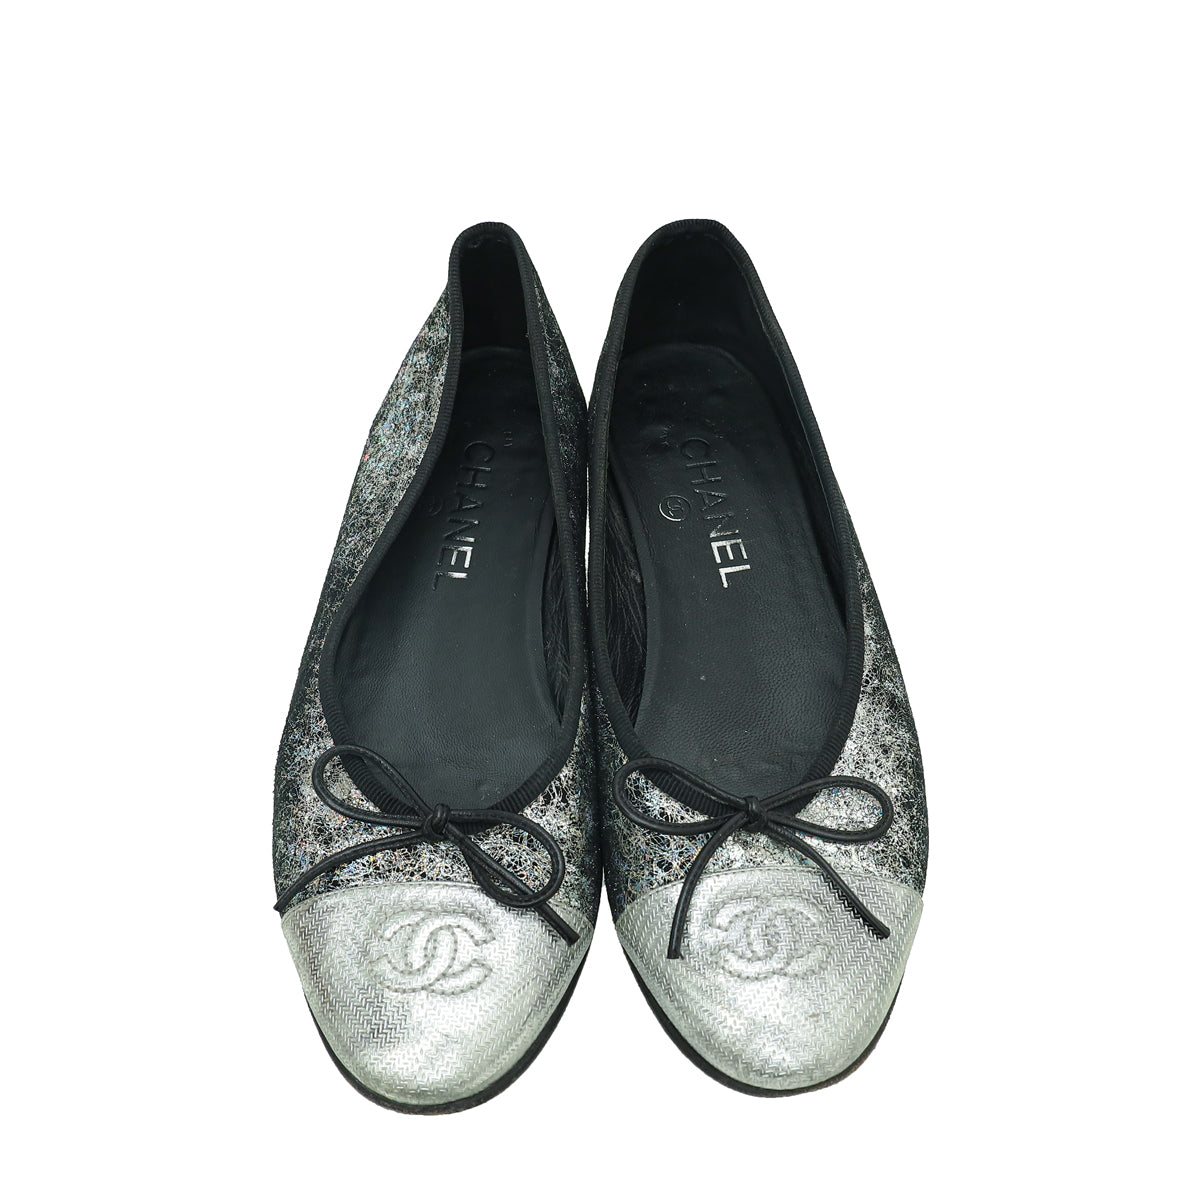 Chanel Metallic Silver Holographic Textured Suede CC Cap Toe Ballet Flats 37